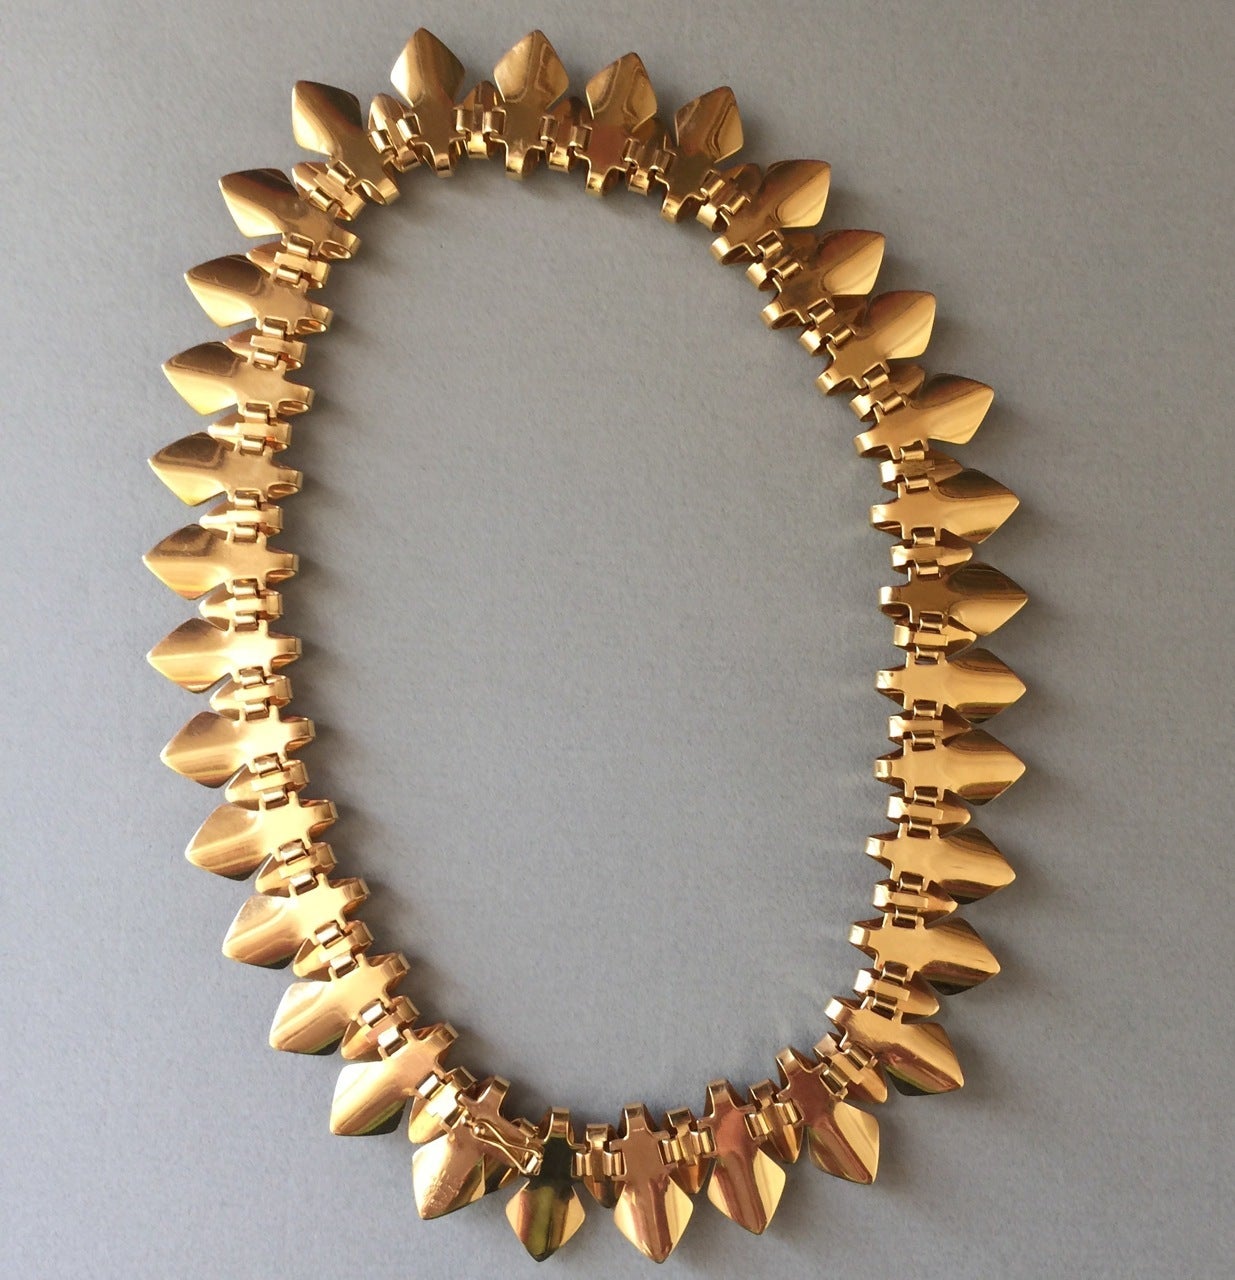 Georg Jensen 18KT Gold Necklace No. 1133 By Tuk Fischer.

Very Rare

Designed in 1963.

Very rare design with dramatic layers of highly polished handmade gold segments that create a 3-D effect. Invisible clasp. Excellent condition. 

96 grams of